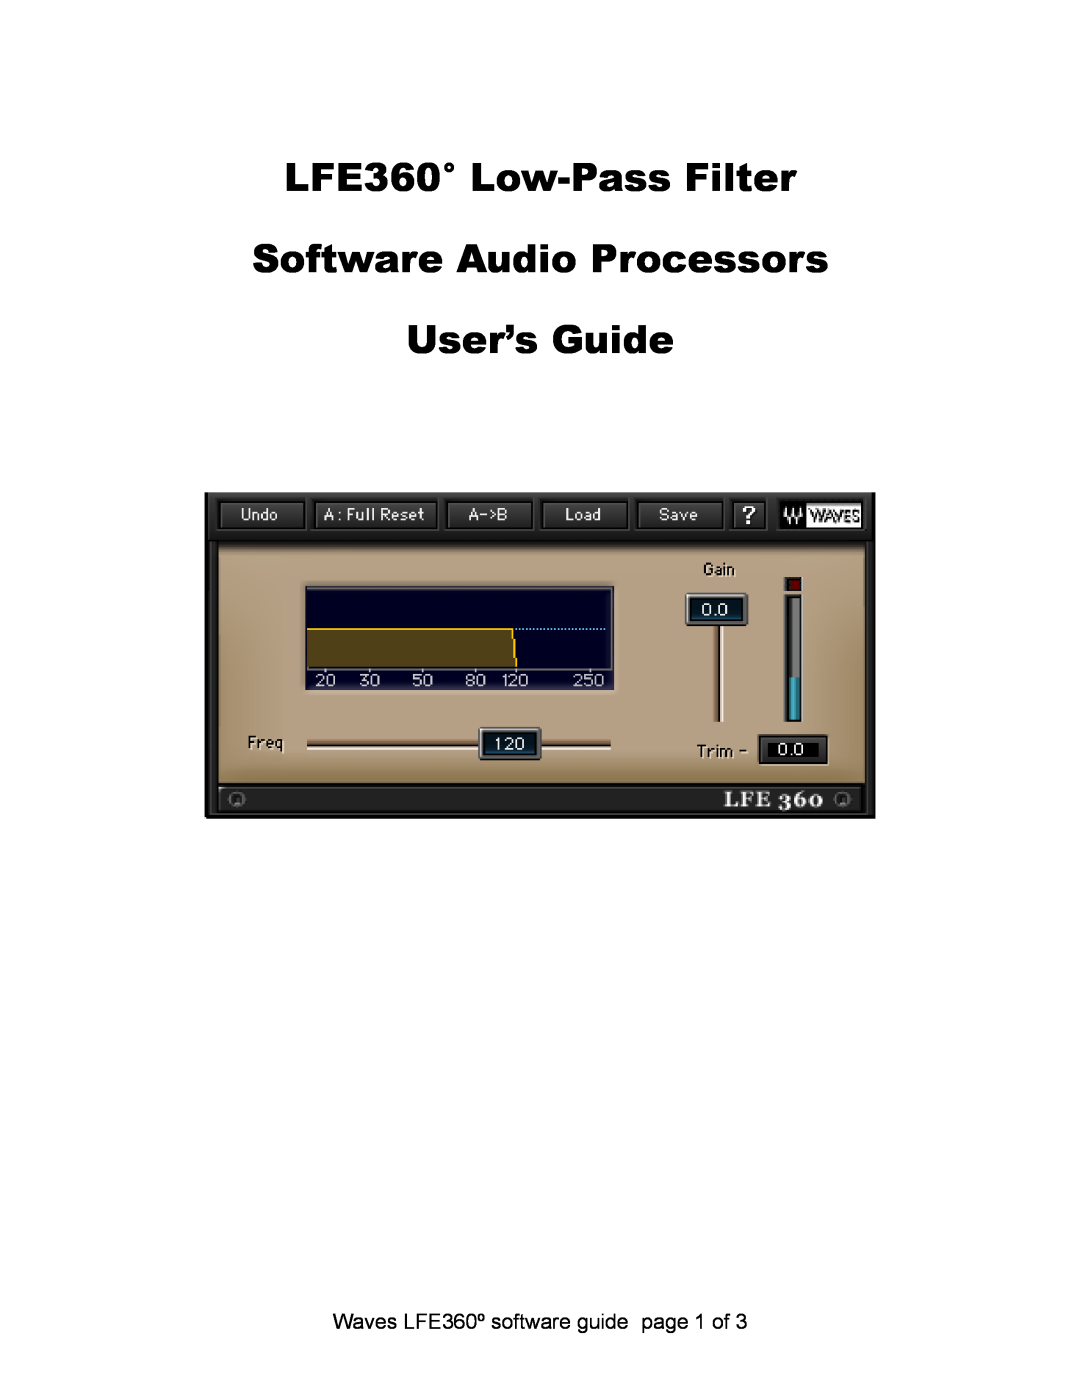 Waves manual LFE360 Low-PassFilter Software Audio Processors, User’s Guide, Waves LFE360º software guide 